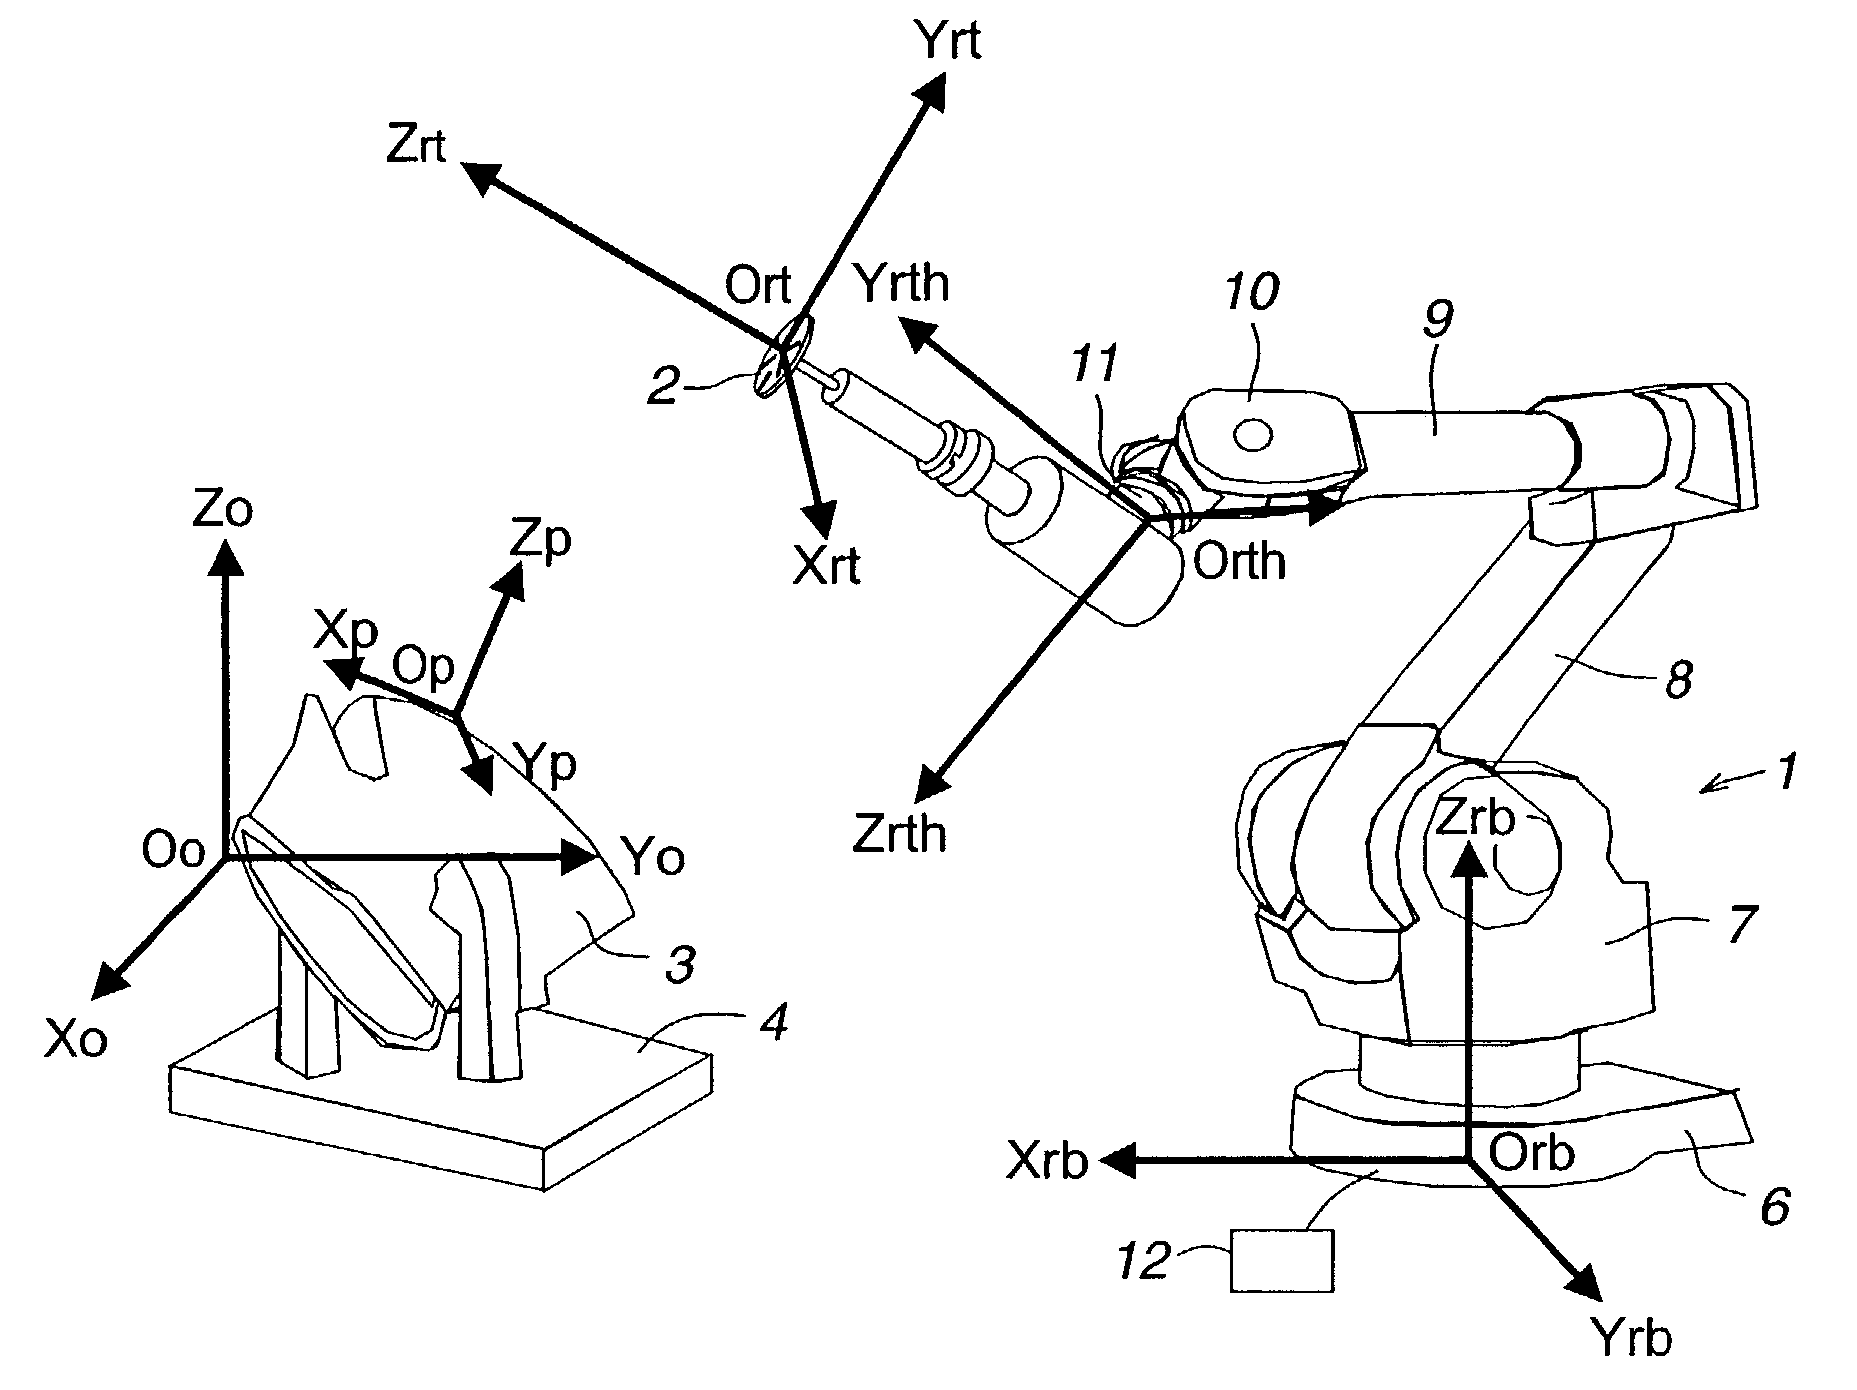 Method for calibrating and programming of a robot application